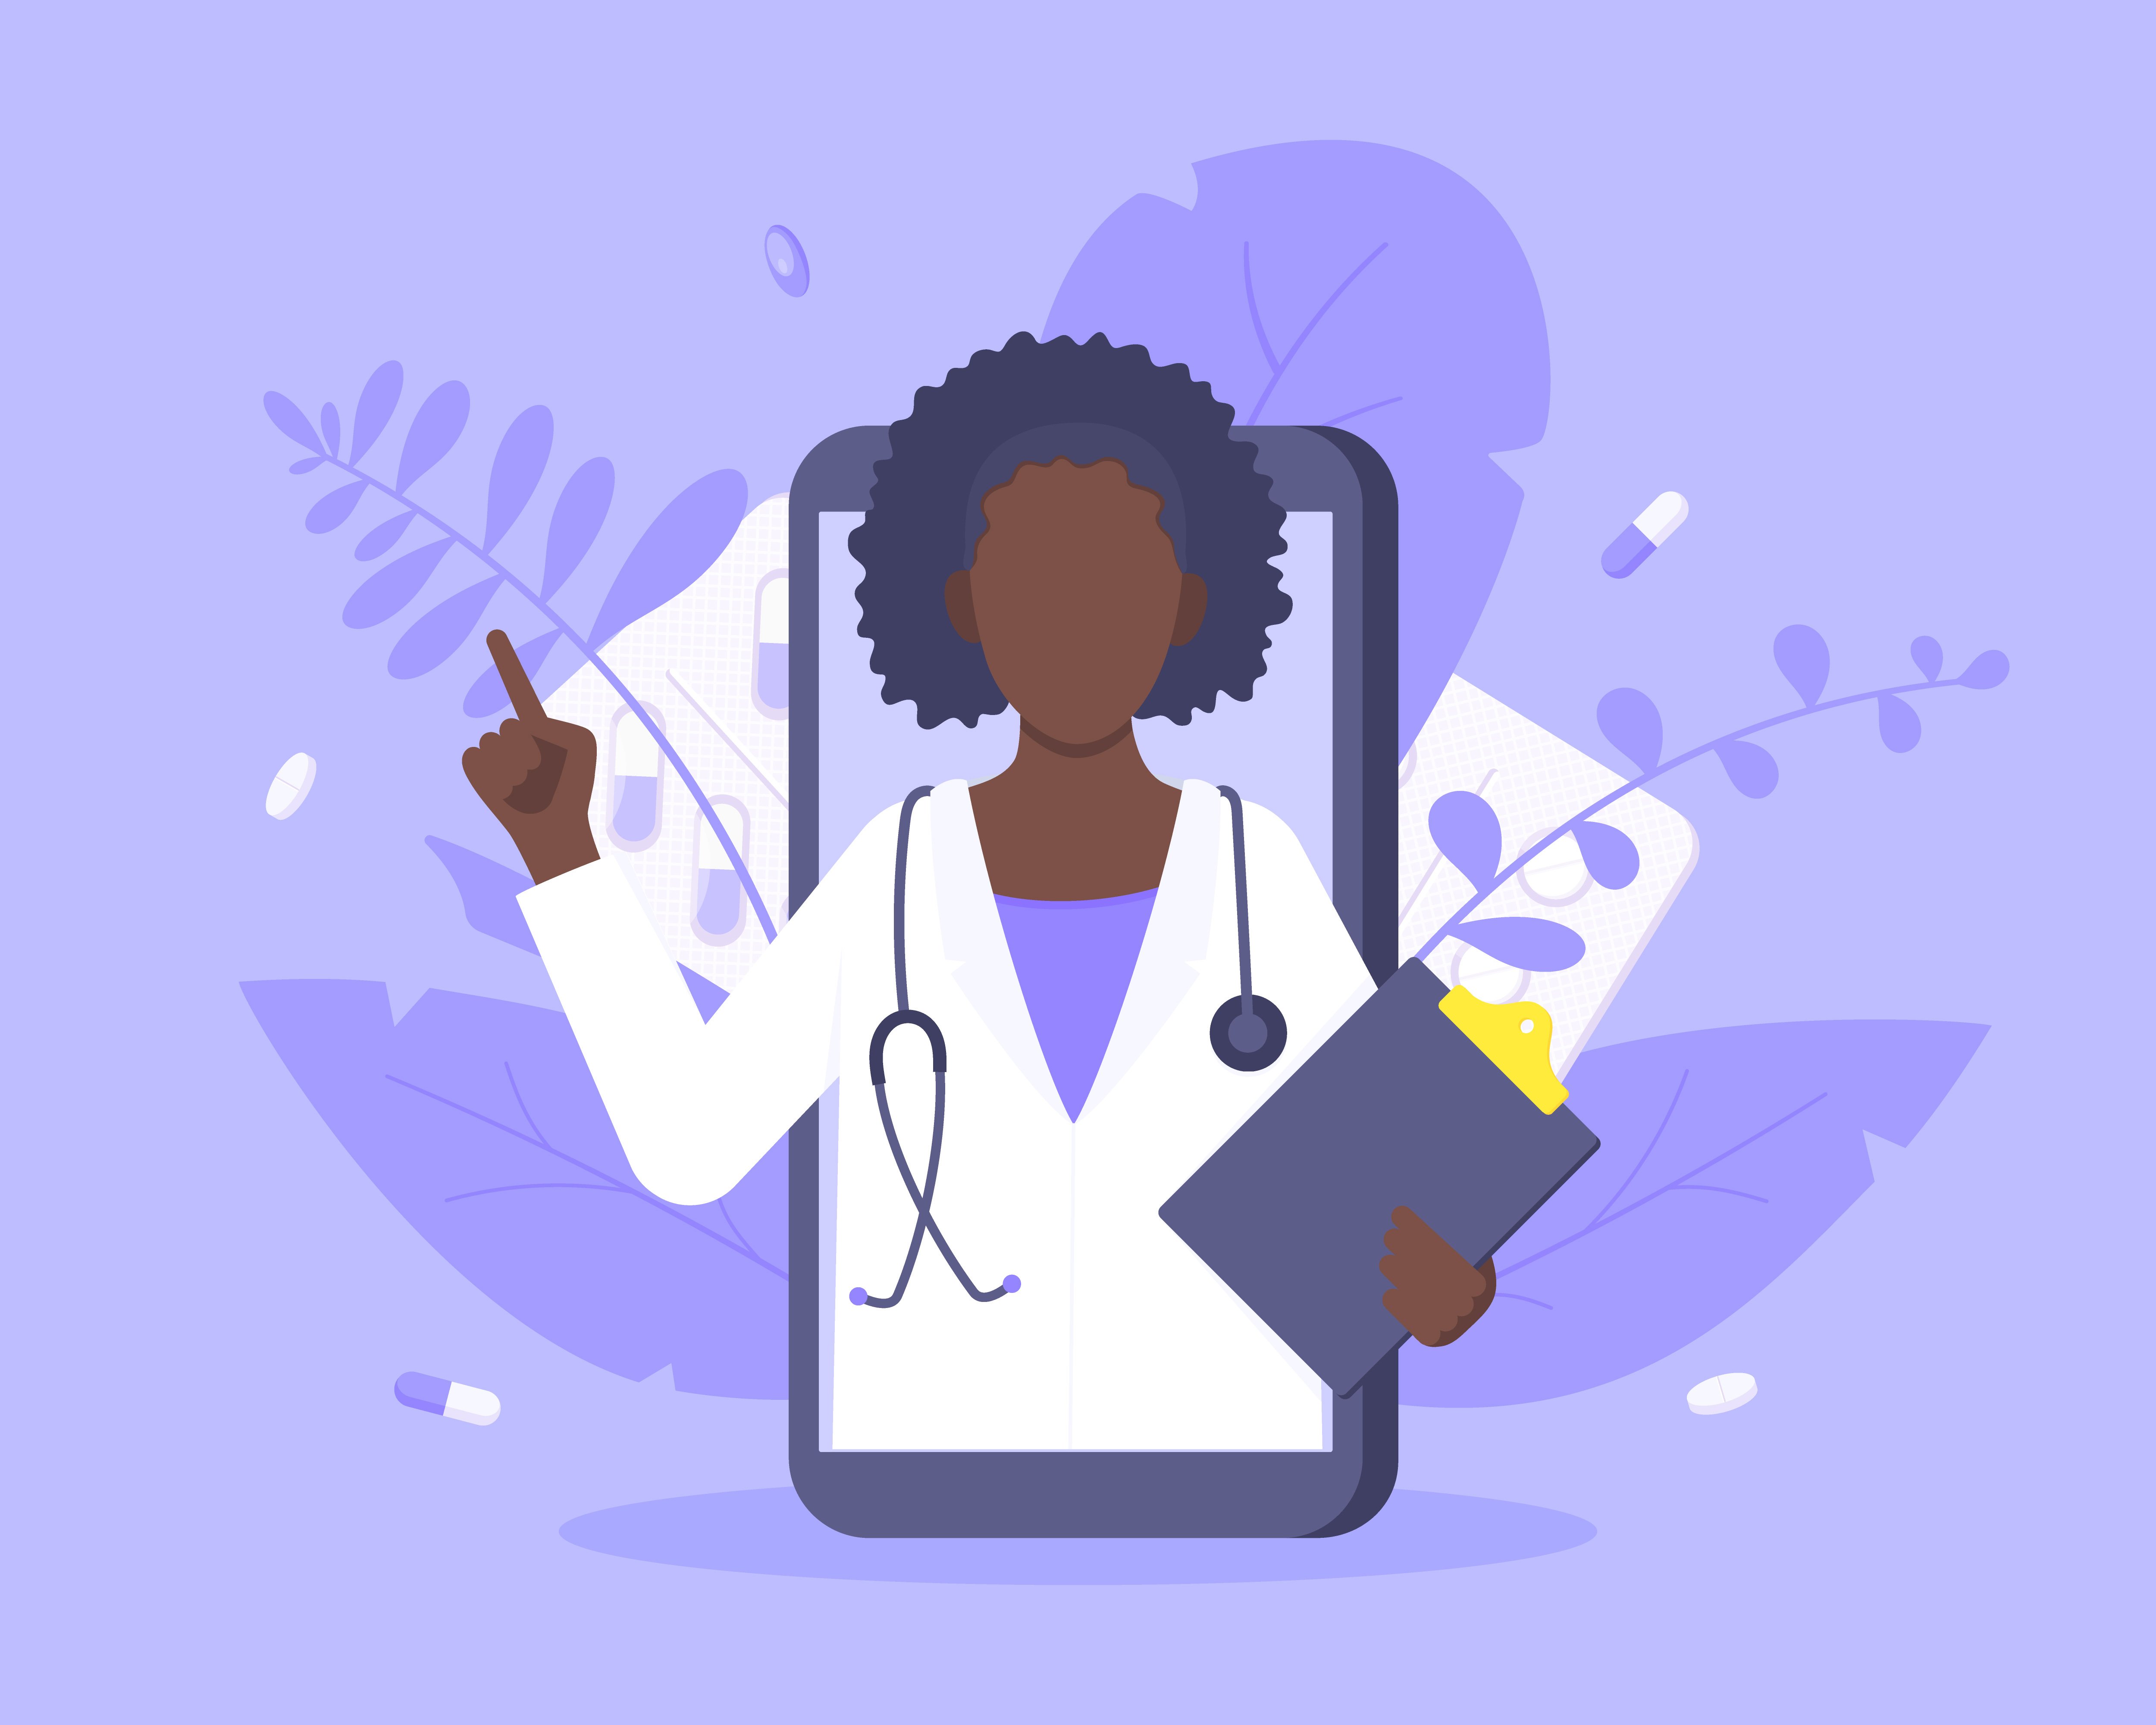 Illustration of doctor performing telehealth visit through a phone